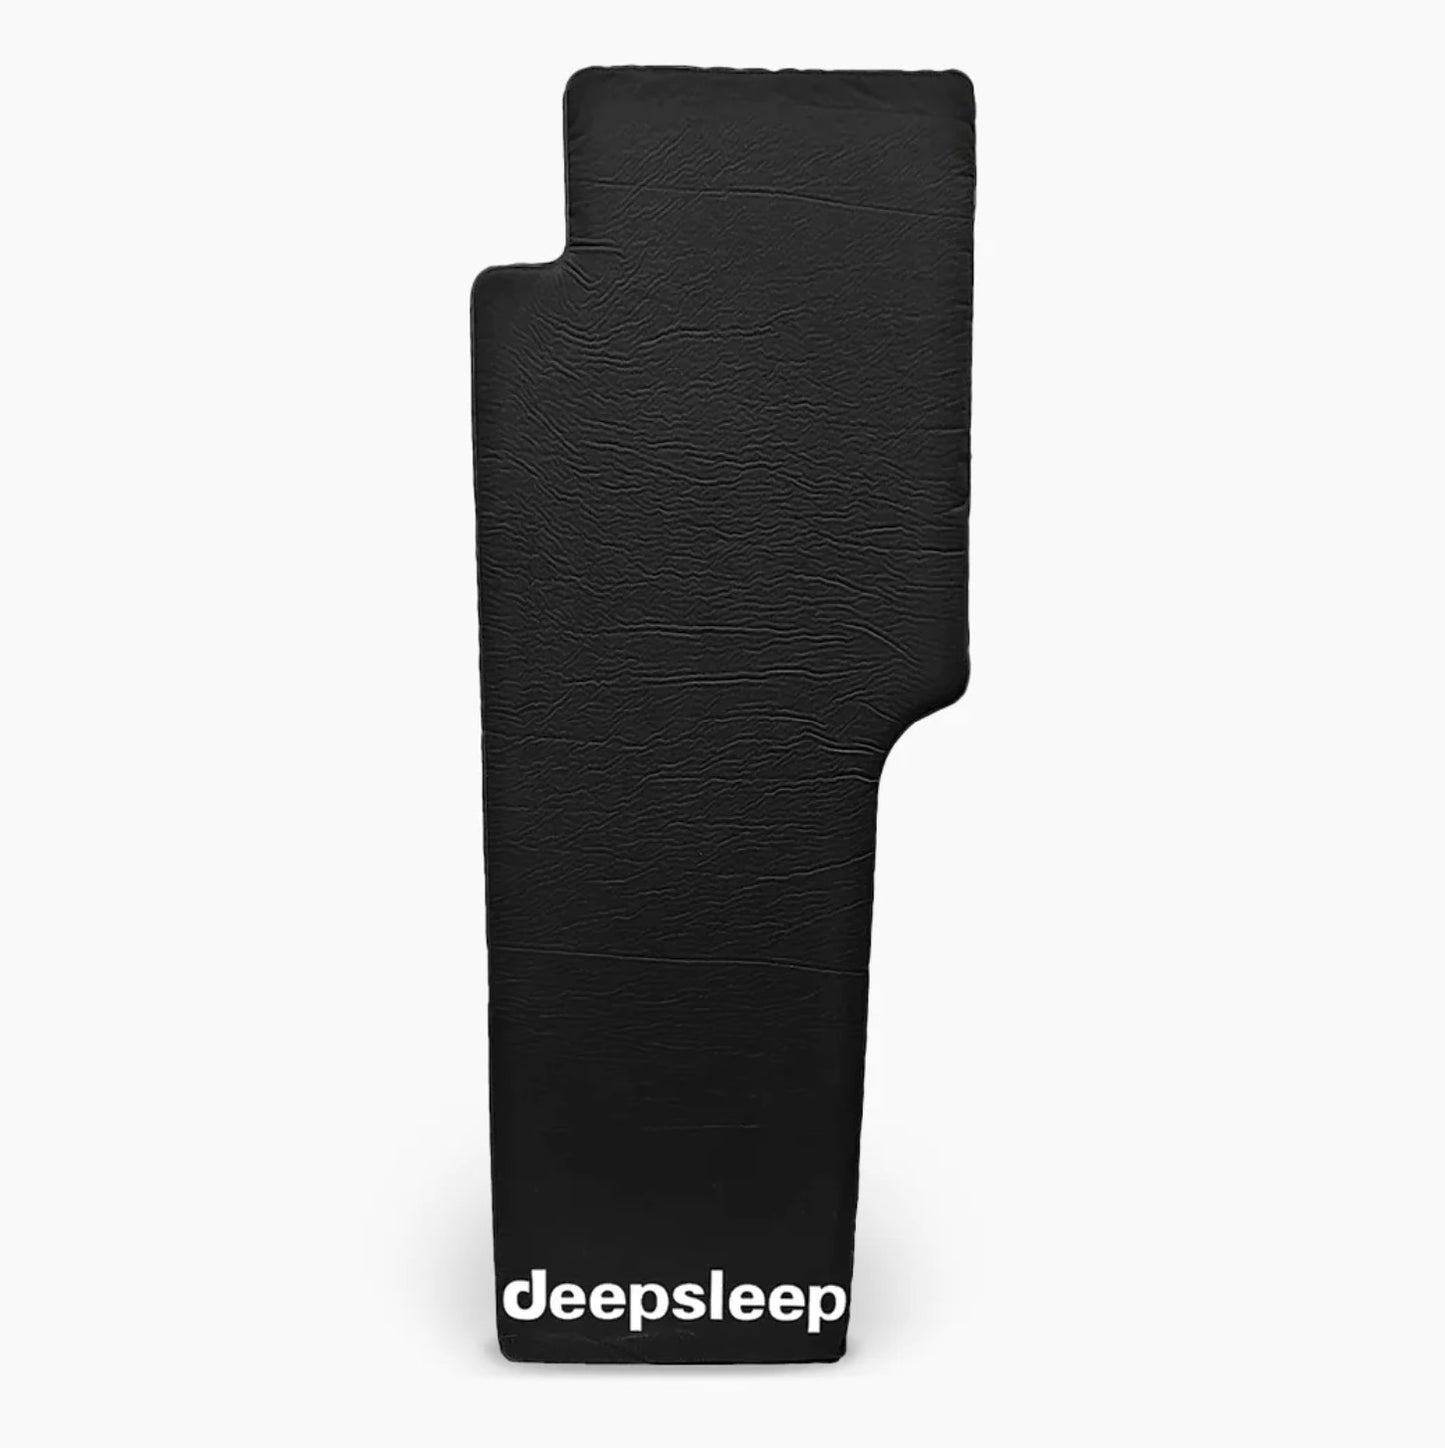 A black Deepsleep Solo mat for Jeep Wrangler Unlimited for car camping and overlanding.